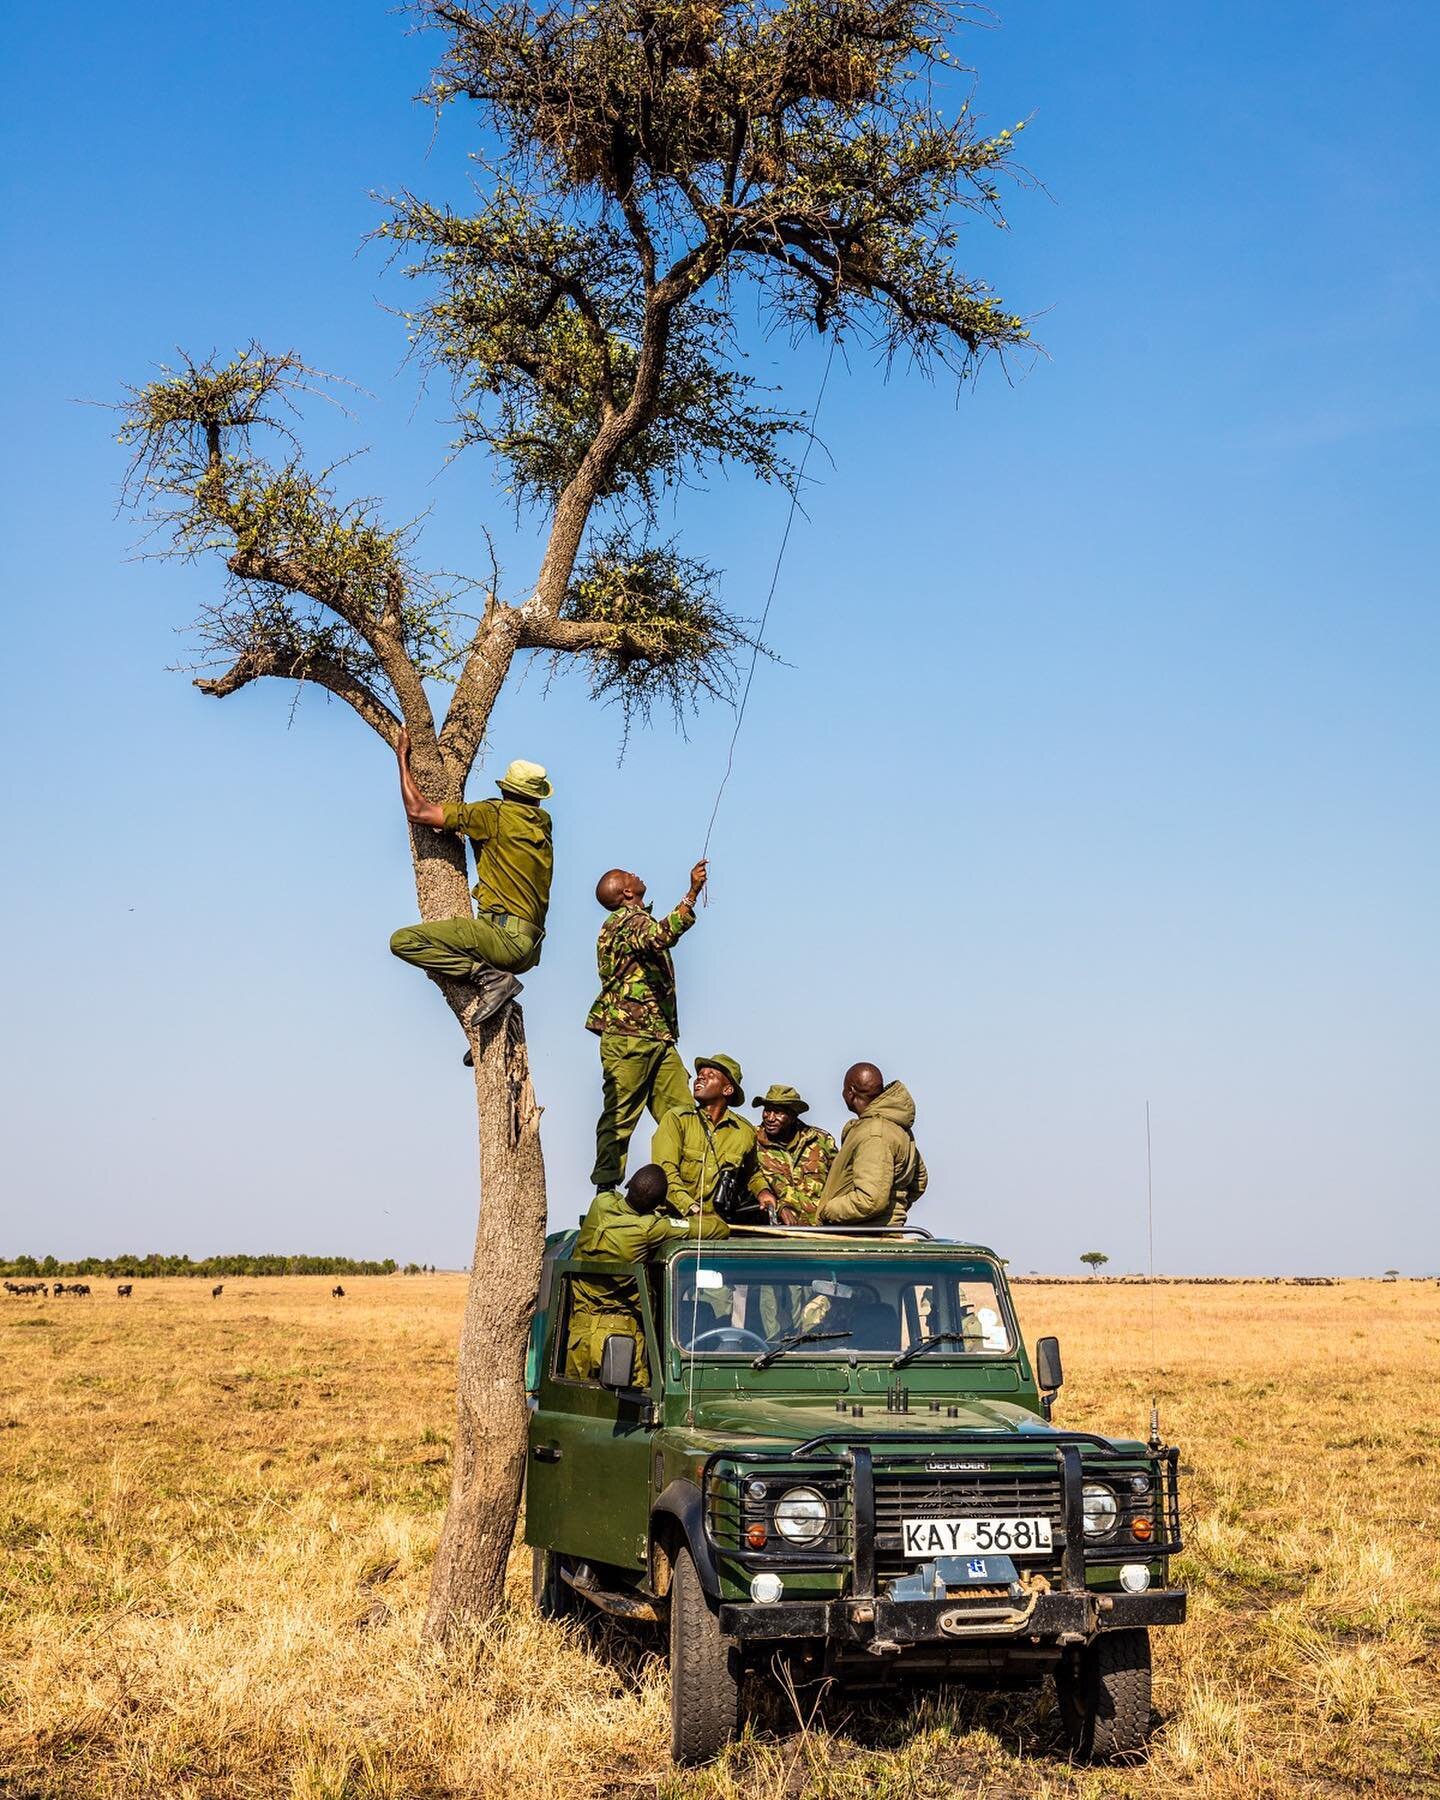 Climbing trees isn&rsquo;t part of most job descriptions, but when poachers have set snares for giraffes, there aren&rsquo;t many other options. Snares - safer to use than guns since they work silently, and without the perpetrator being present at th